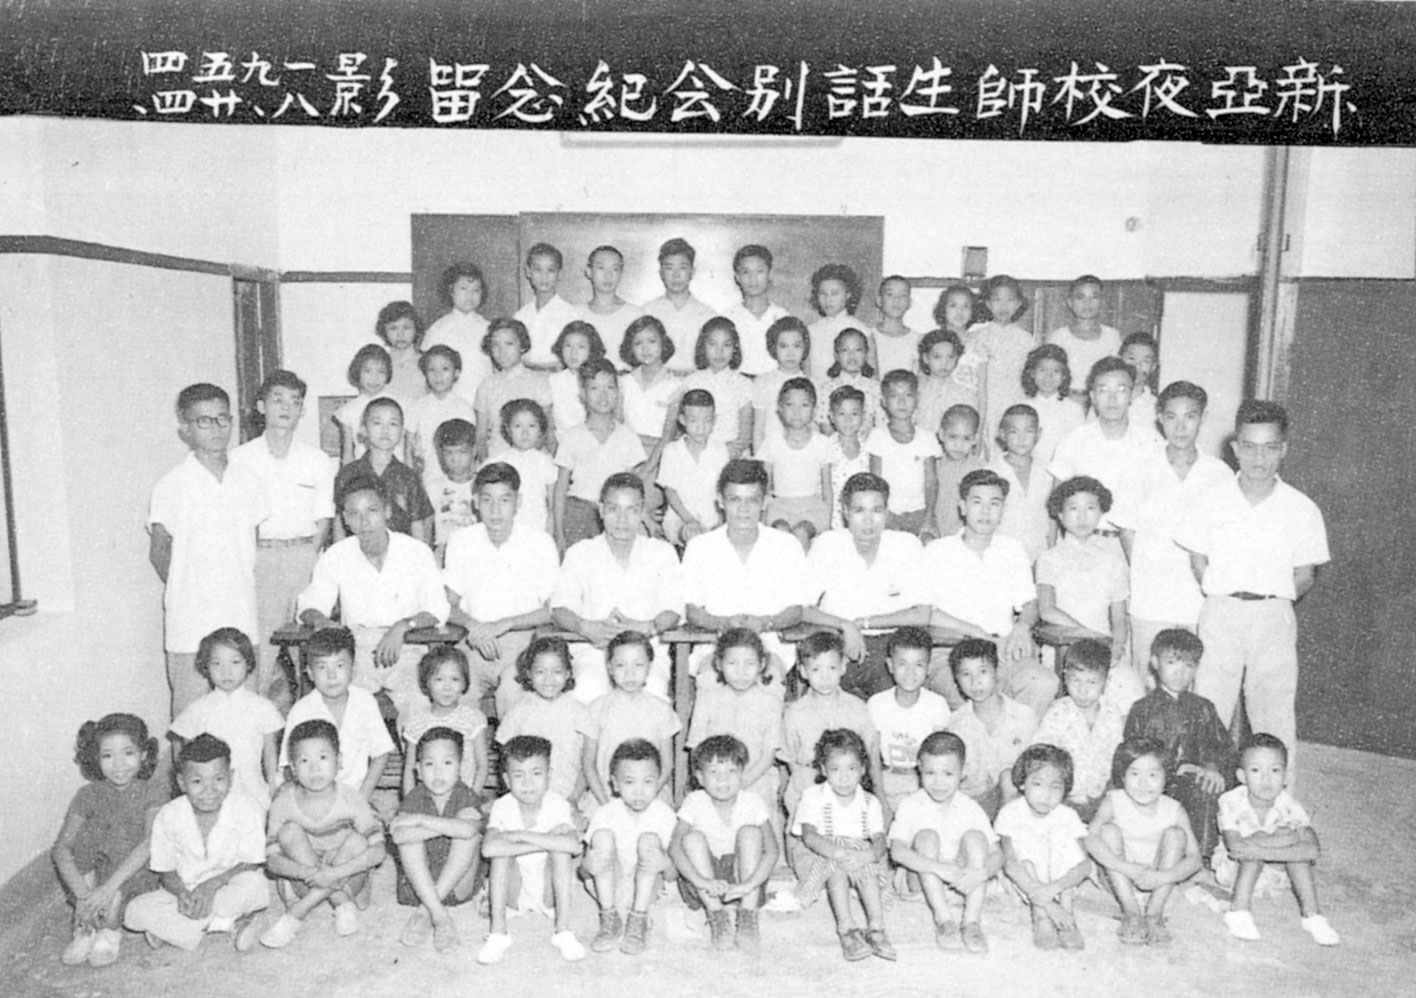 Teachers and students bidding farewell to the New Asia School (1954)